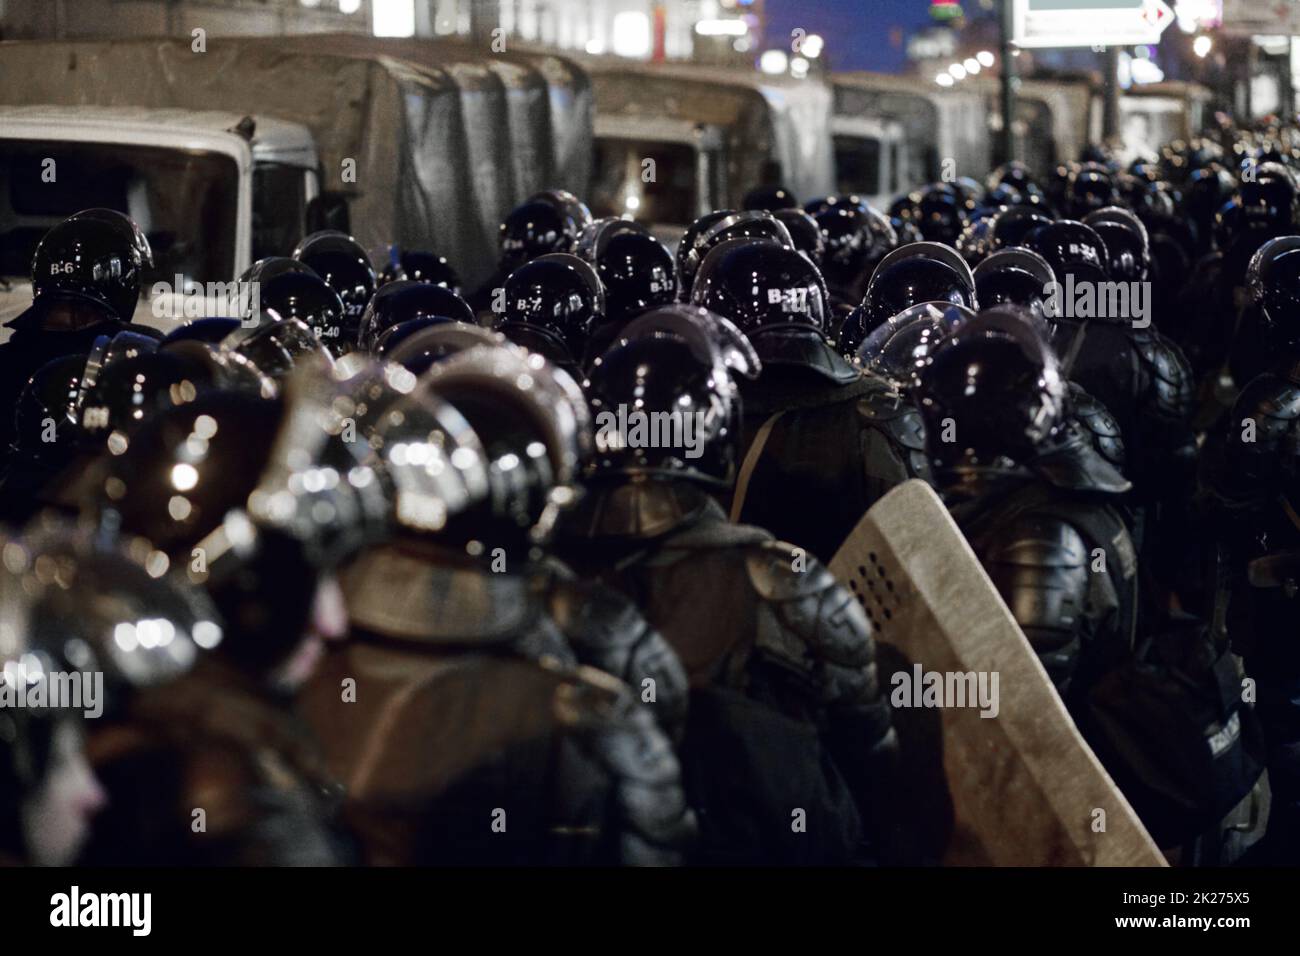 Let's create love not war. The army barricading a riot in the city. Stock Photo